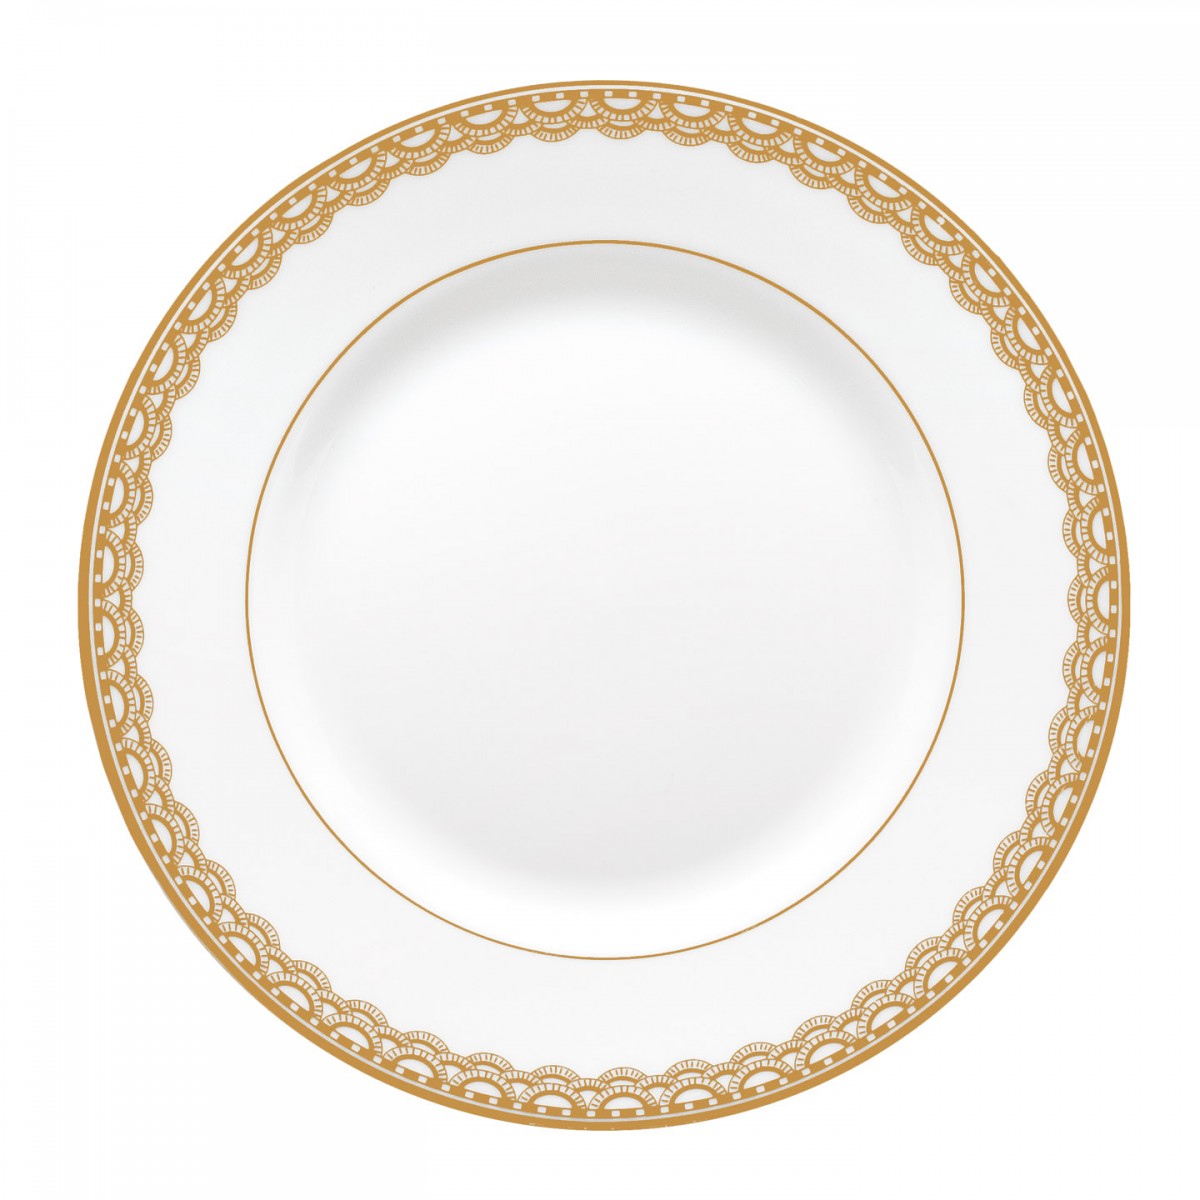 waterford-lismore-lace-gold-bread-and-butter-plate-6.5-in.jpg